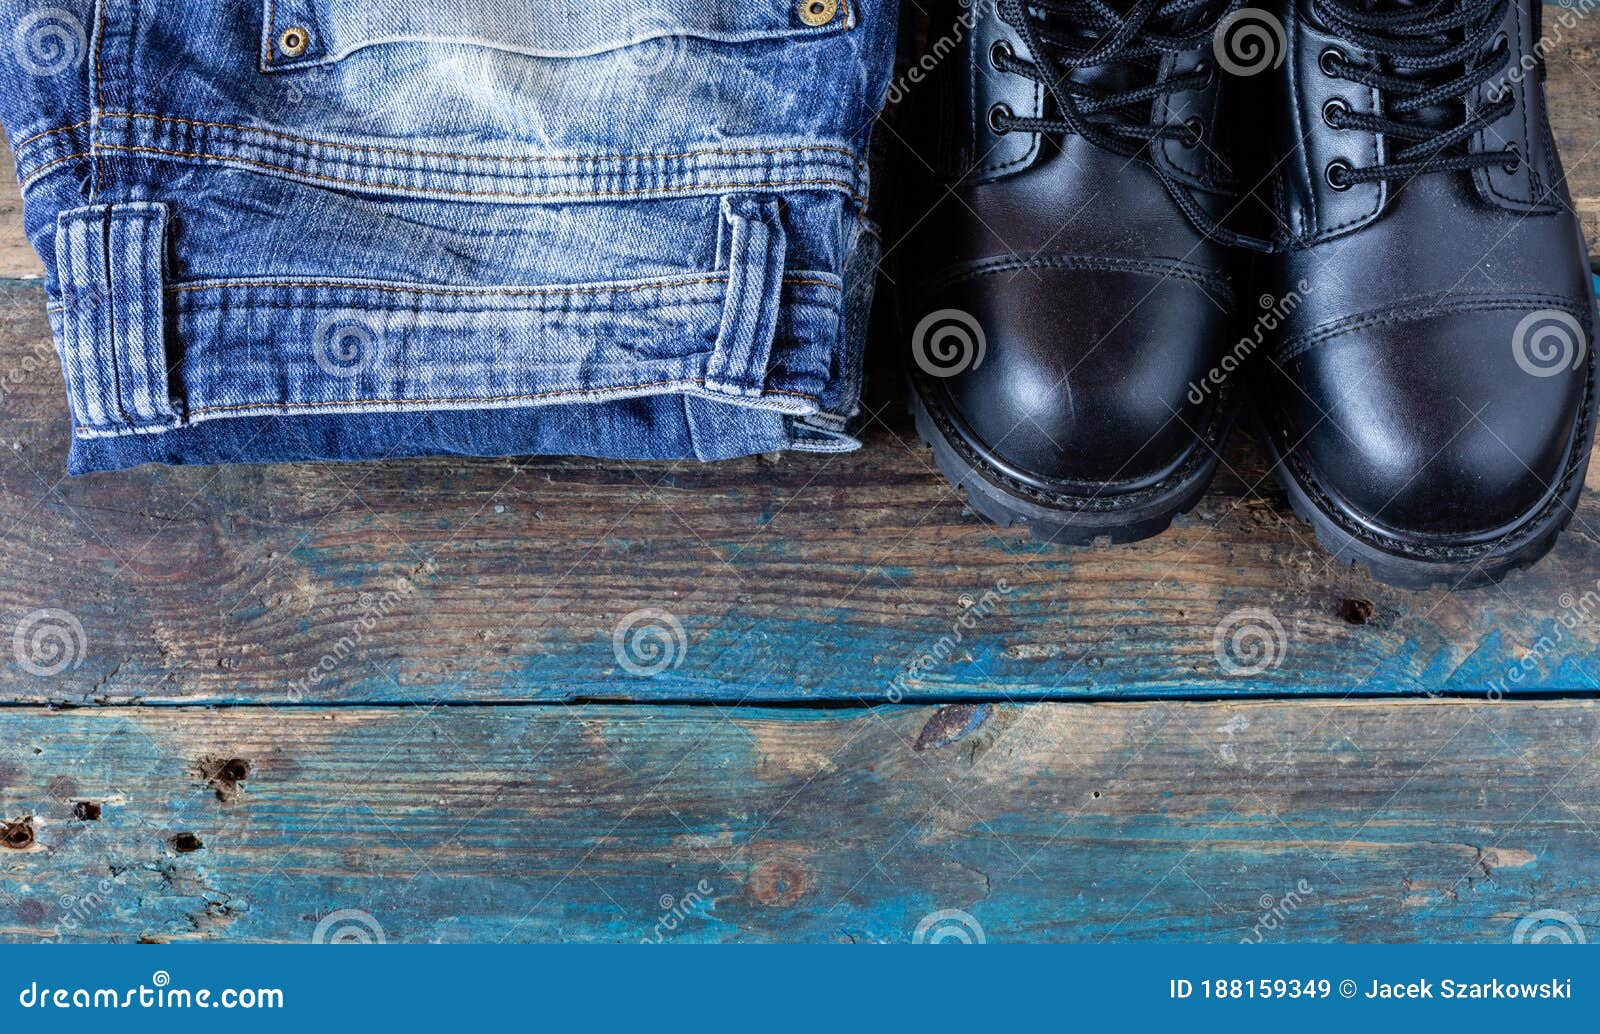 Blue Jeans and Leather Shoes. Folded Pants on Old Boards. Black Work ...